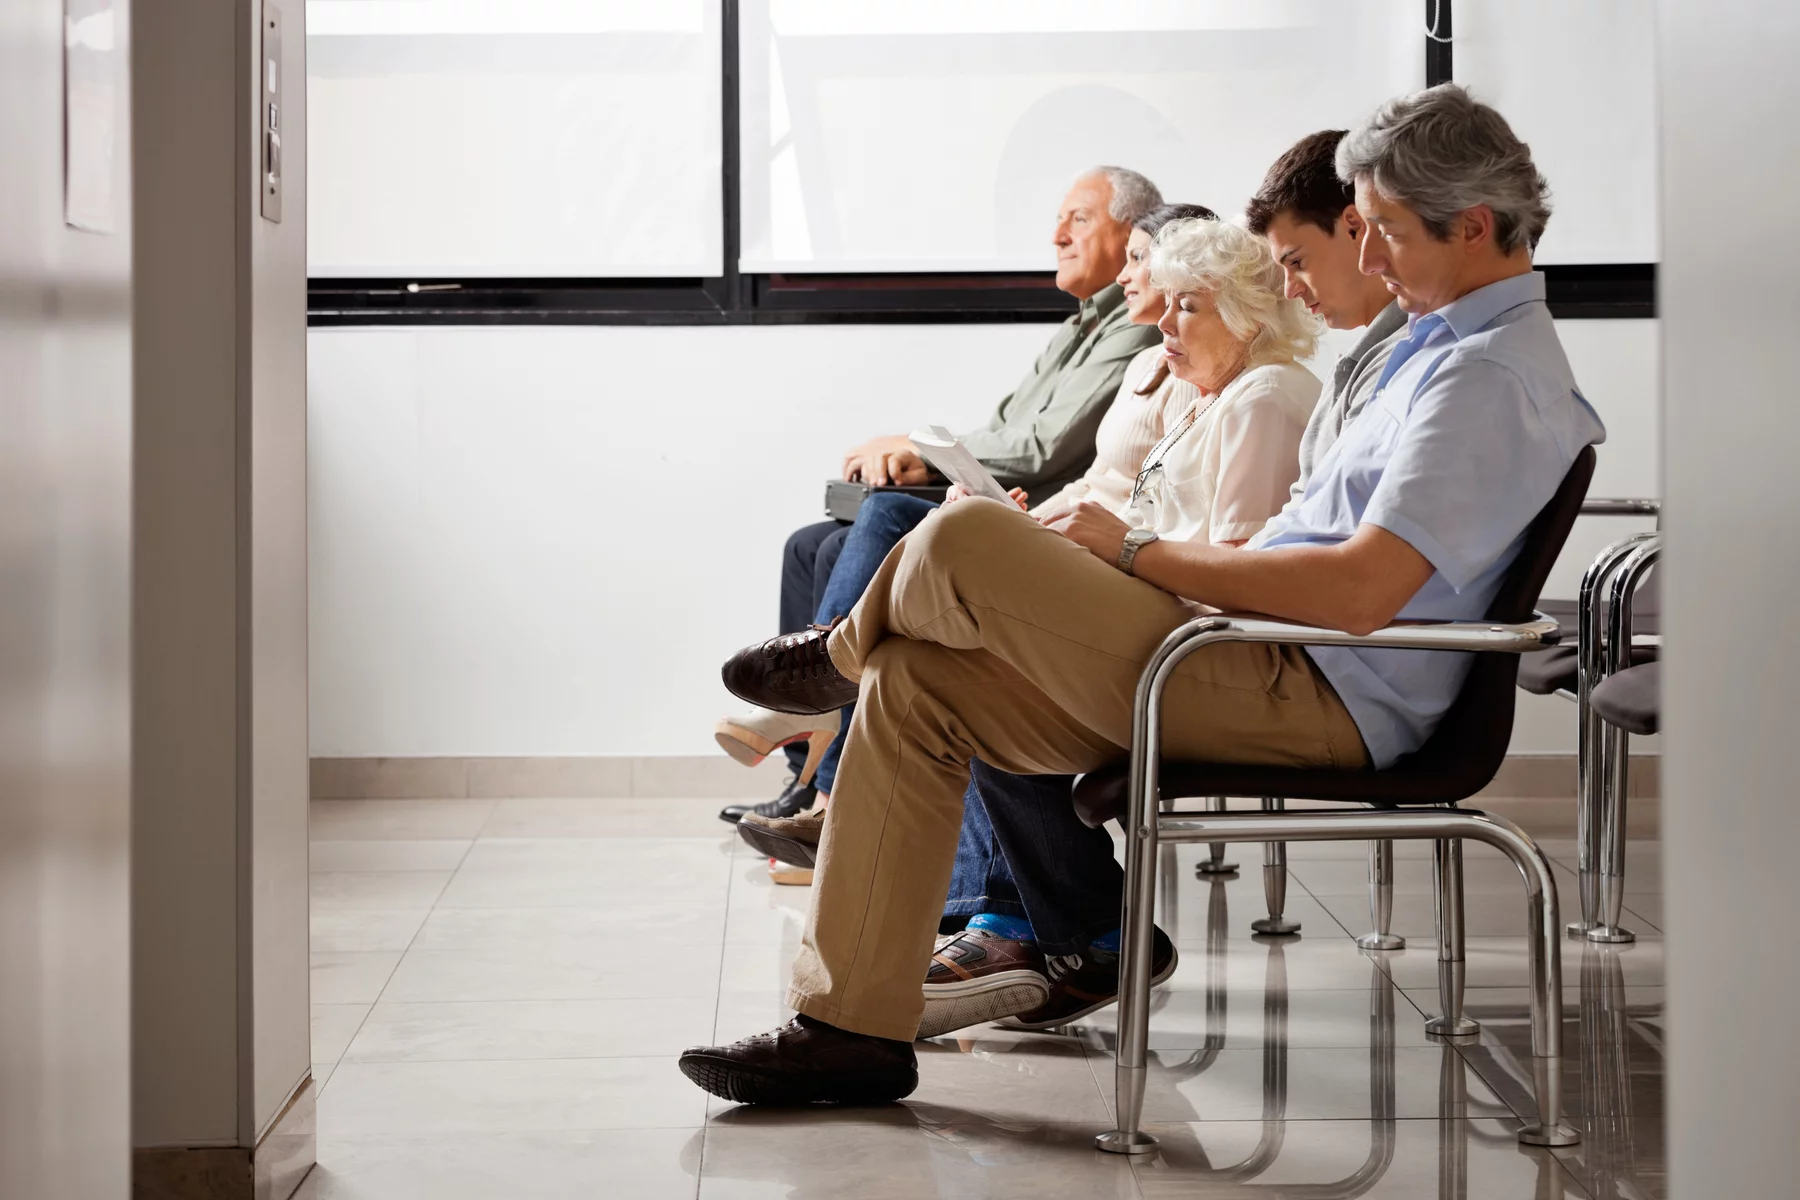 patients waiting in doctor's waiting room